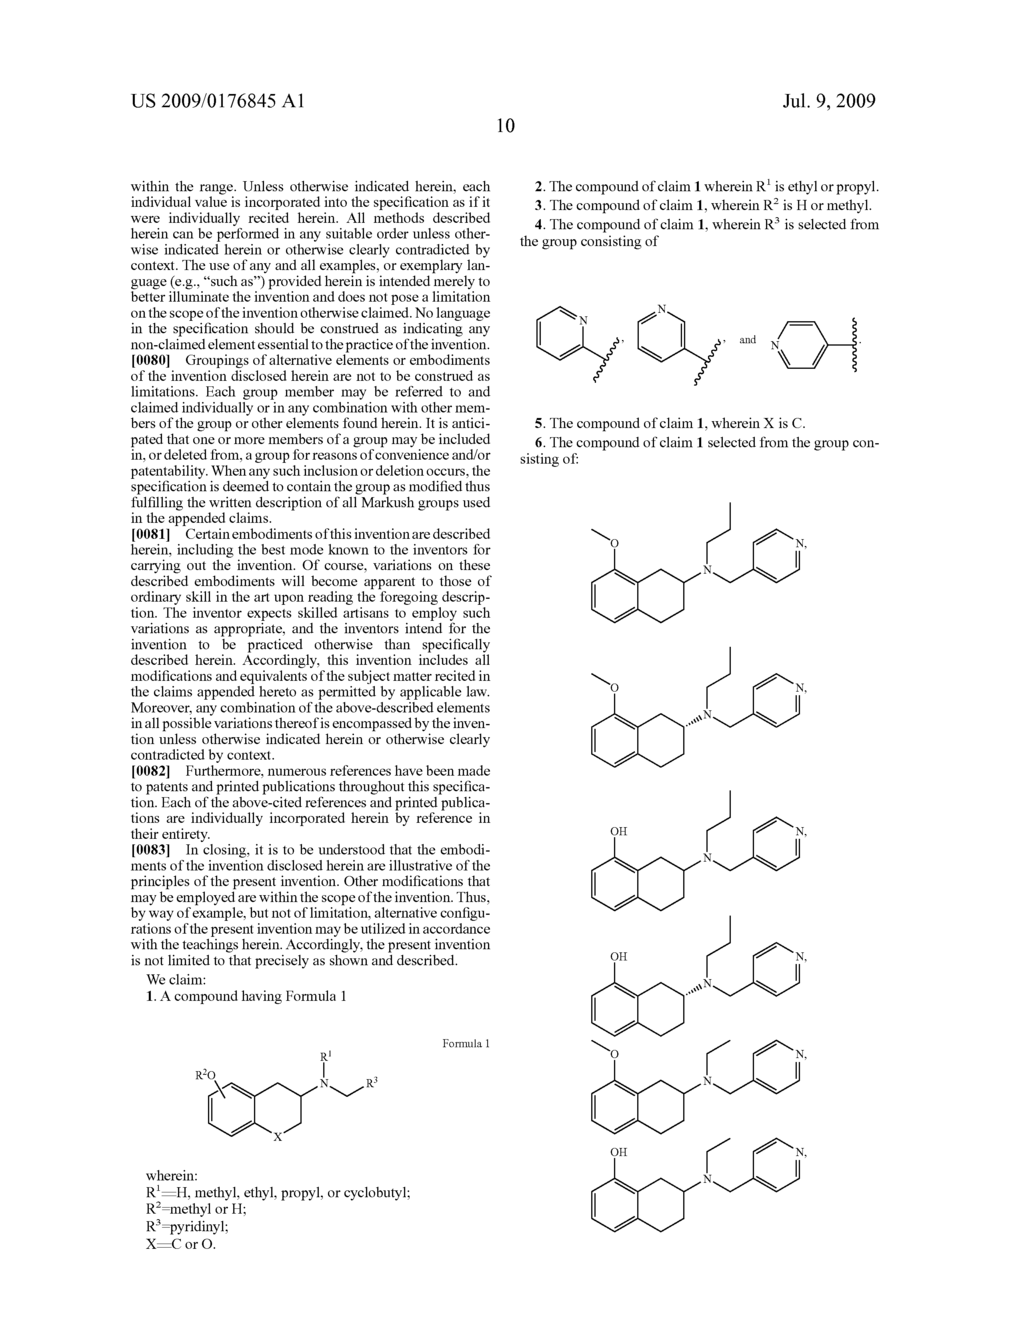 SUBSTITUTED 2-AMINOTETRALIN DERIVATIVES AS SELECTIVE ALPHA 2B AGONIST - diagram, schematic, and image 11